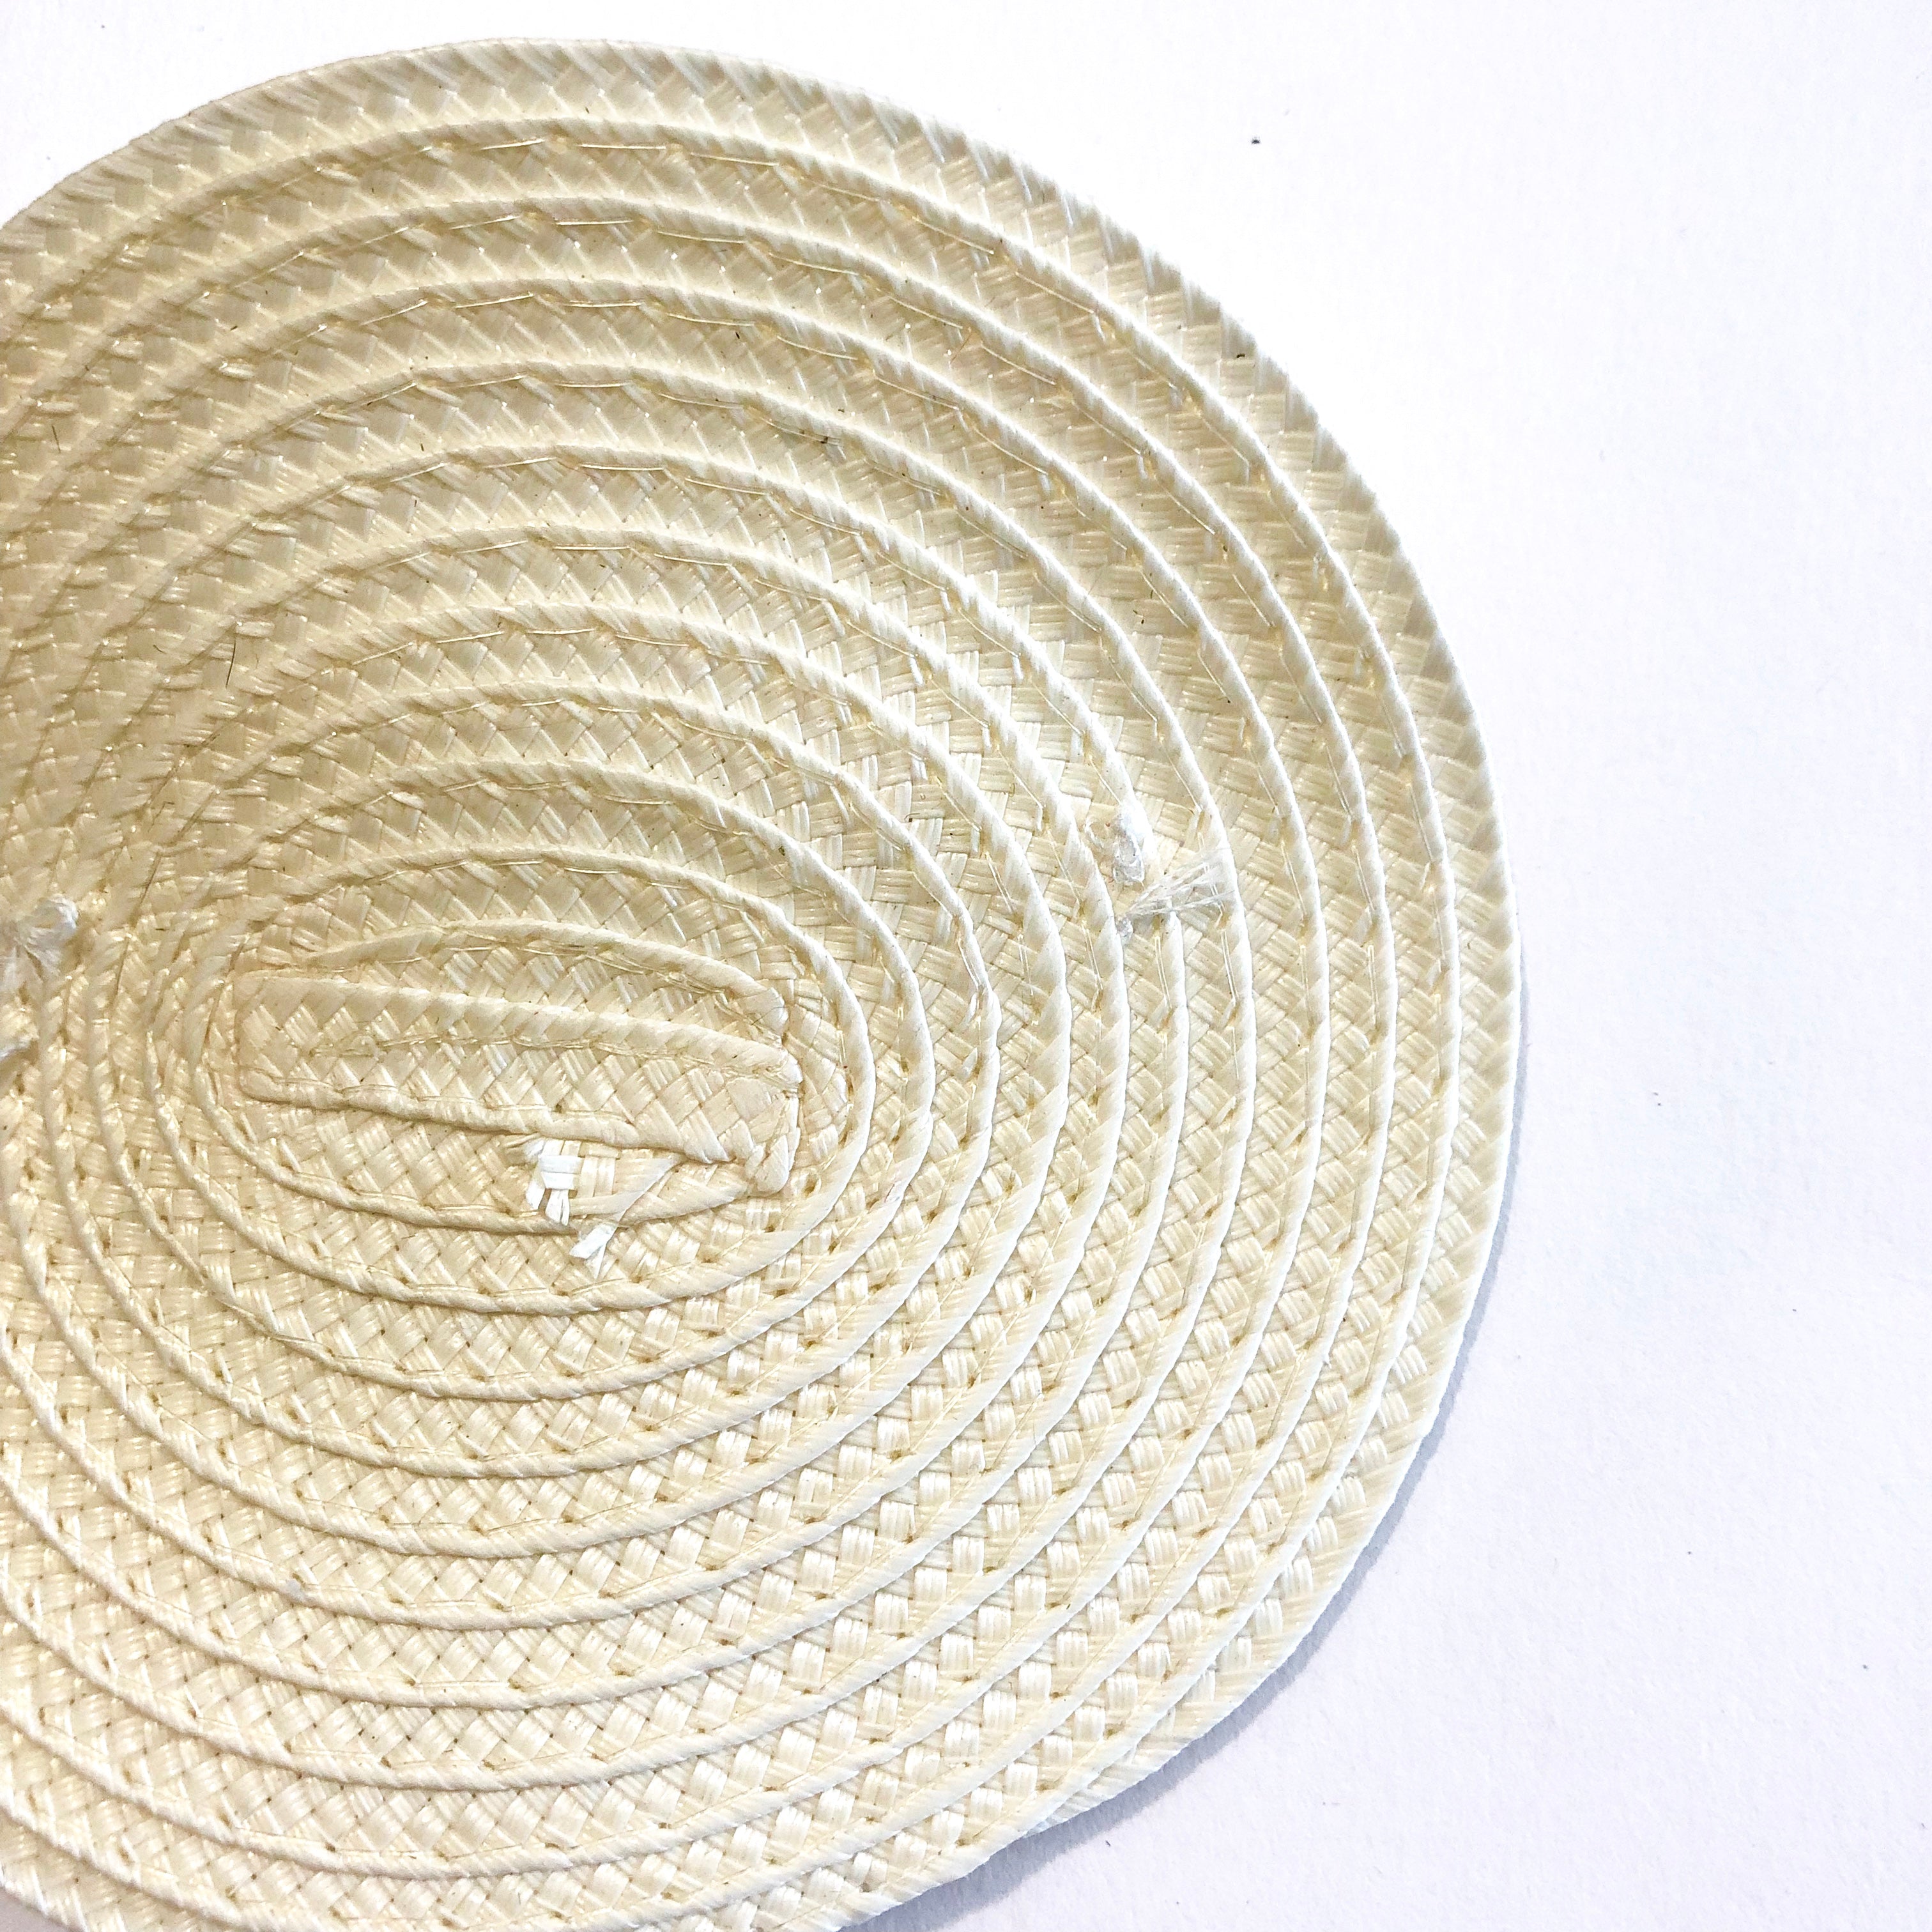 Polybraid 100mm Round Disc Millinery Fascinator Base with Comb x 5 pcs - Ivory ((SECONDS))